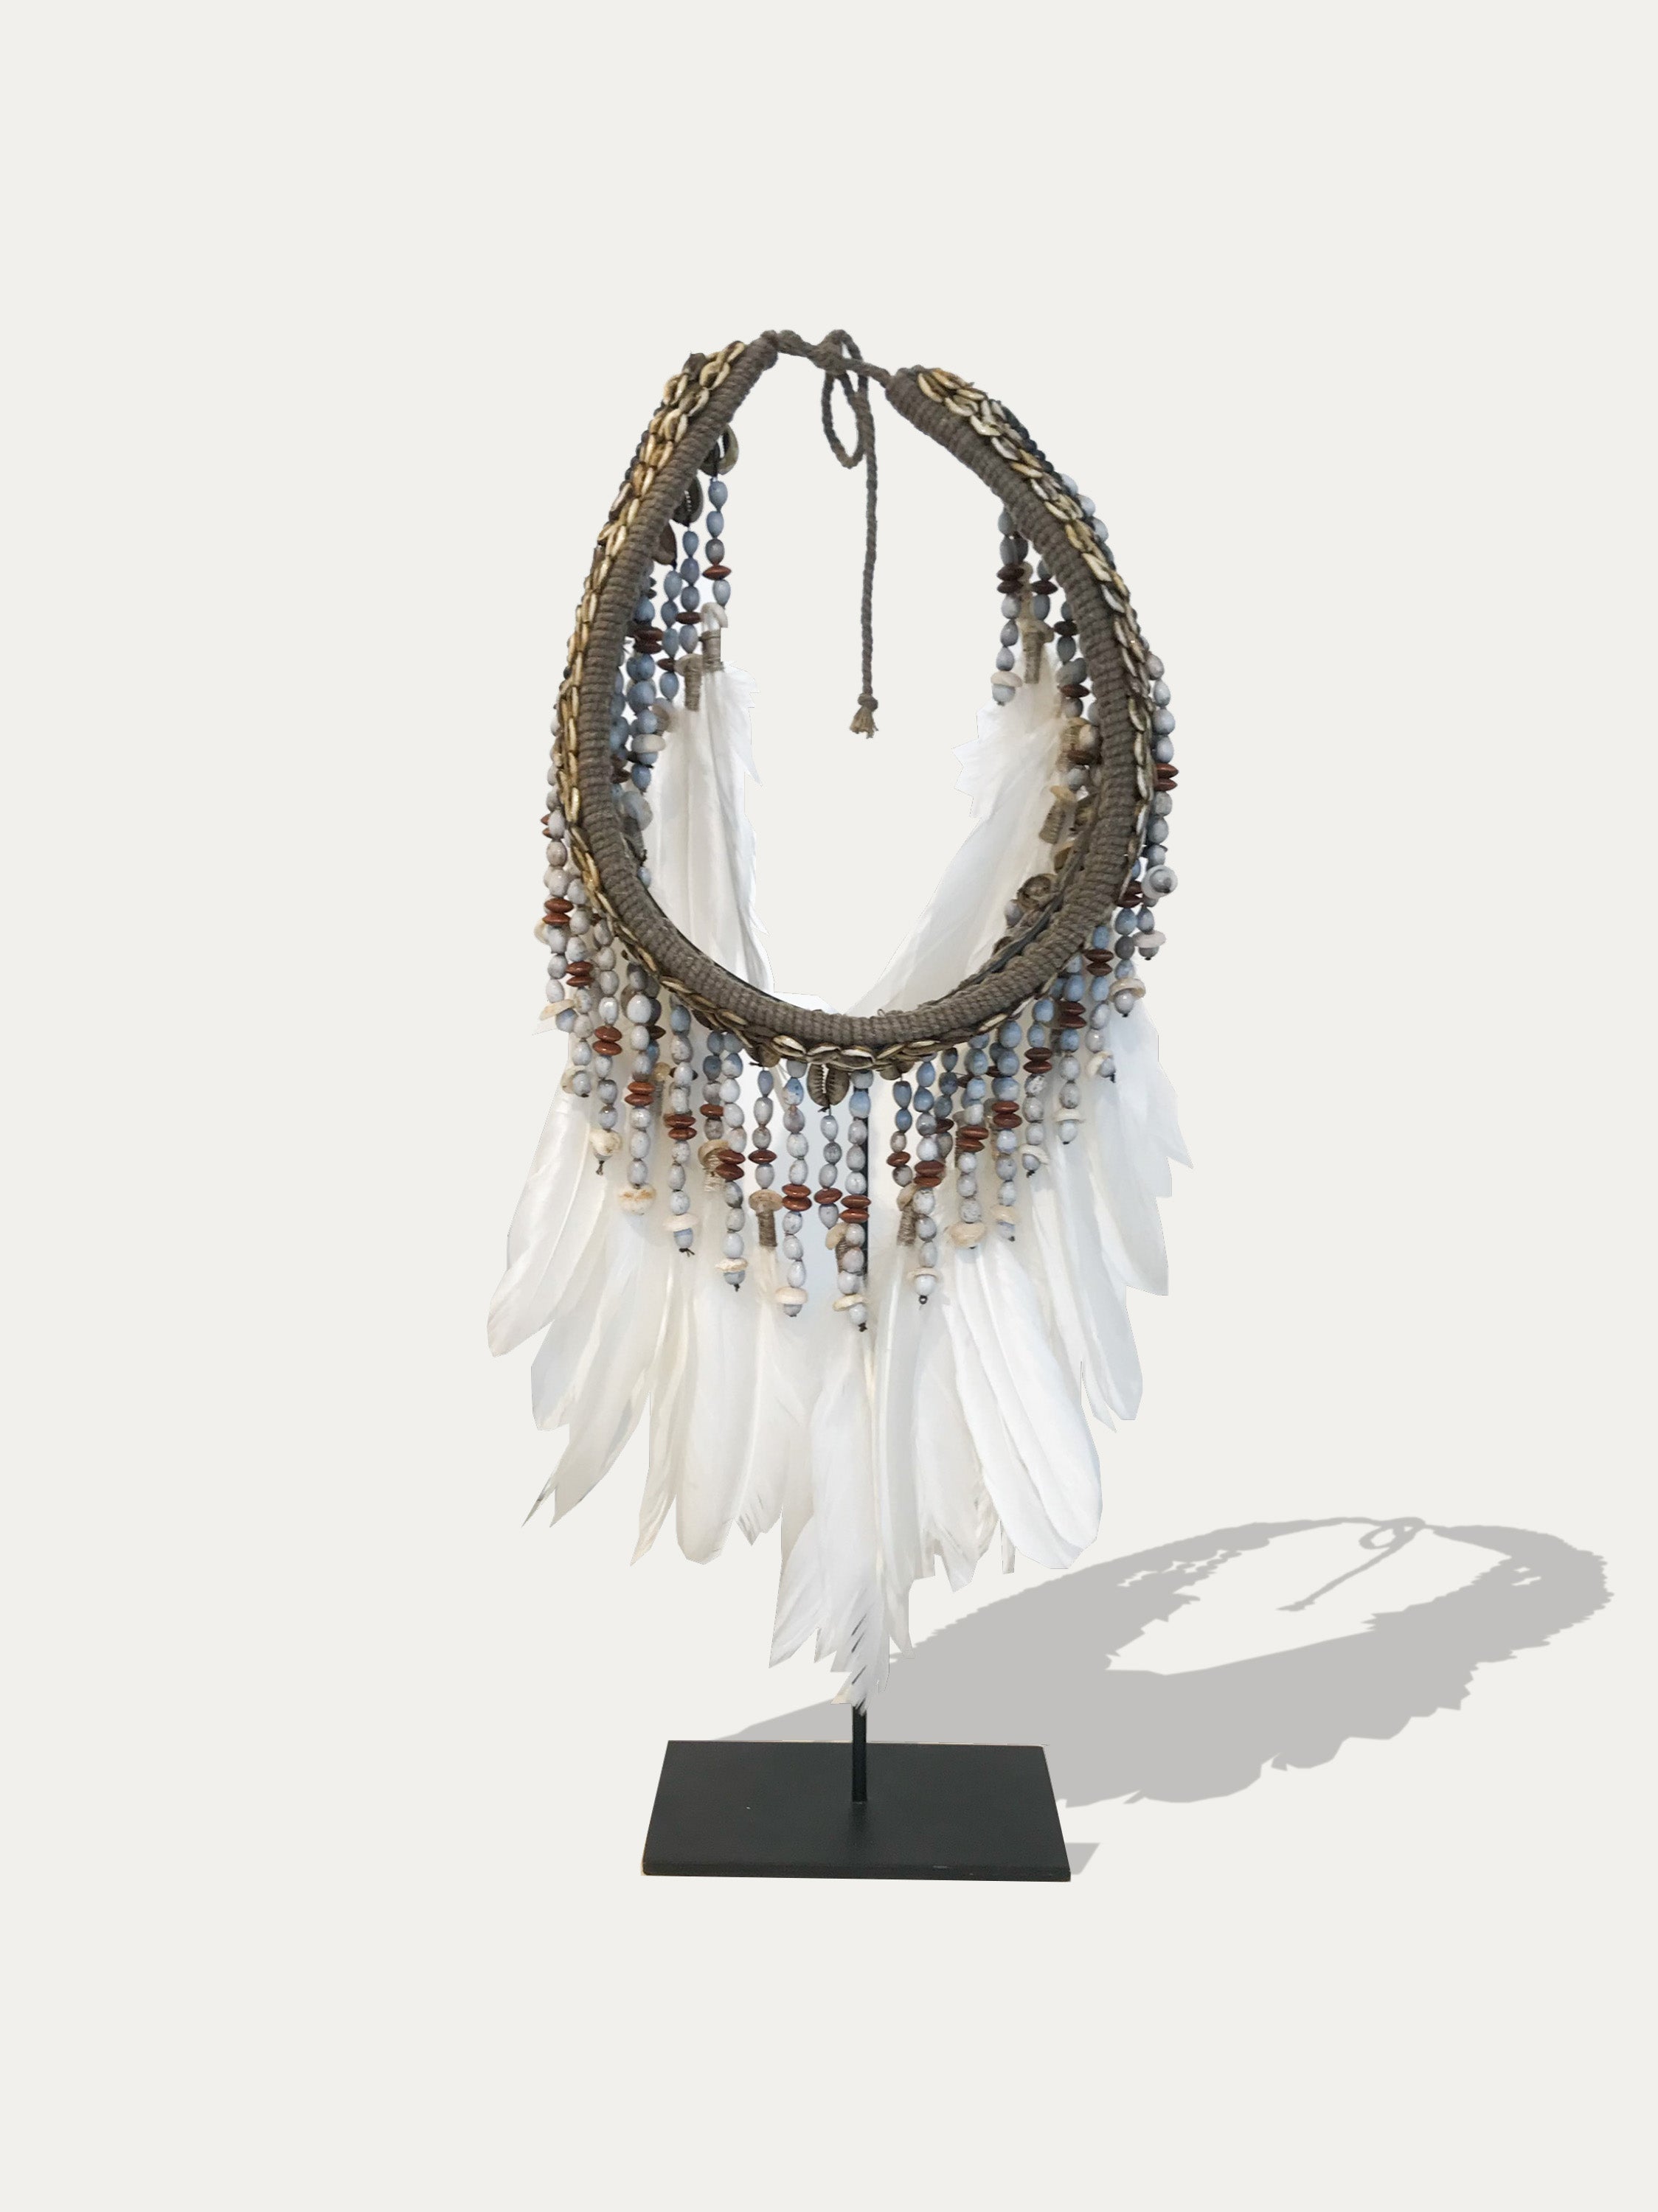 Feather necklace from Papua - Asian Art from Kirschon